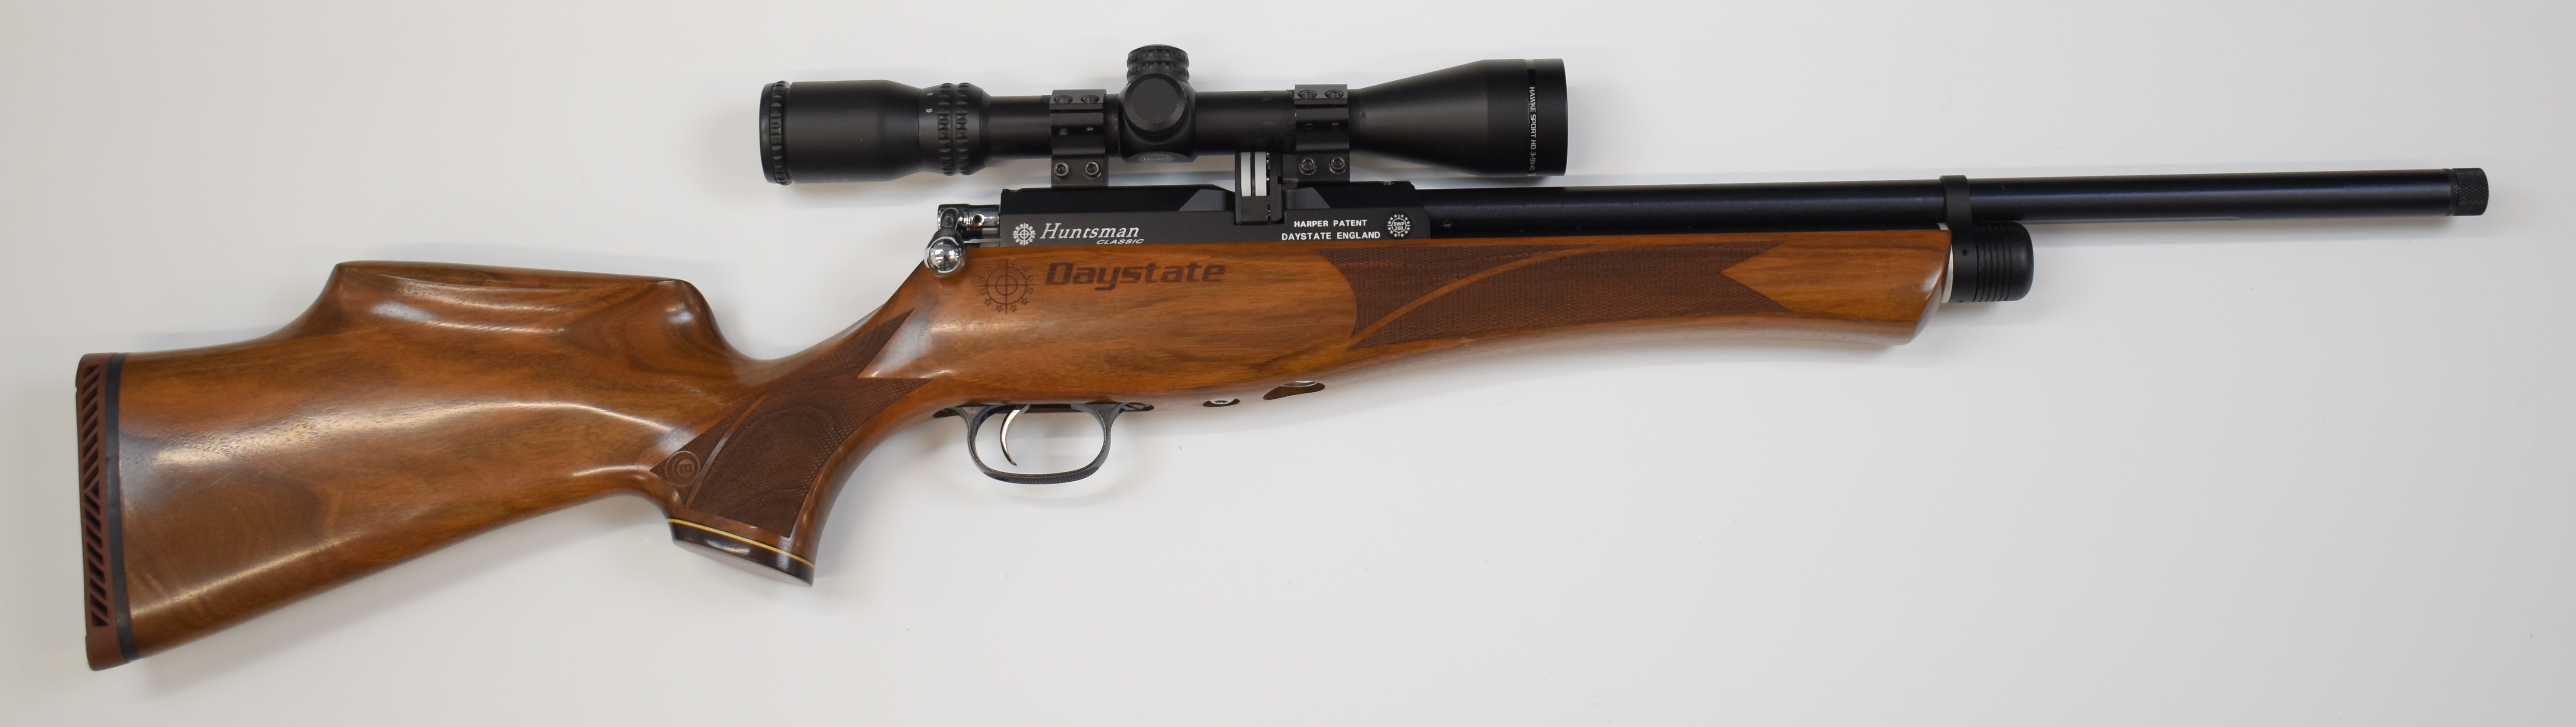 Daystate Huntsman Classic .177 PCP air rifle with monogrammed and chequered semi-pistol grip, - Image 2 of 9